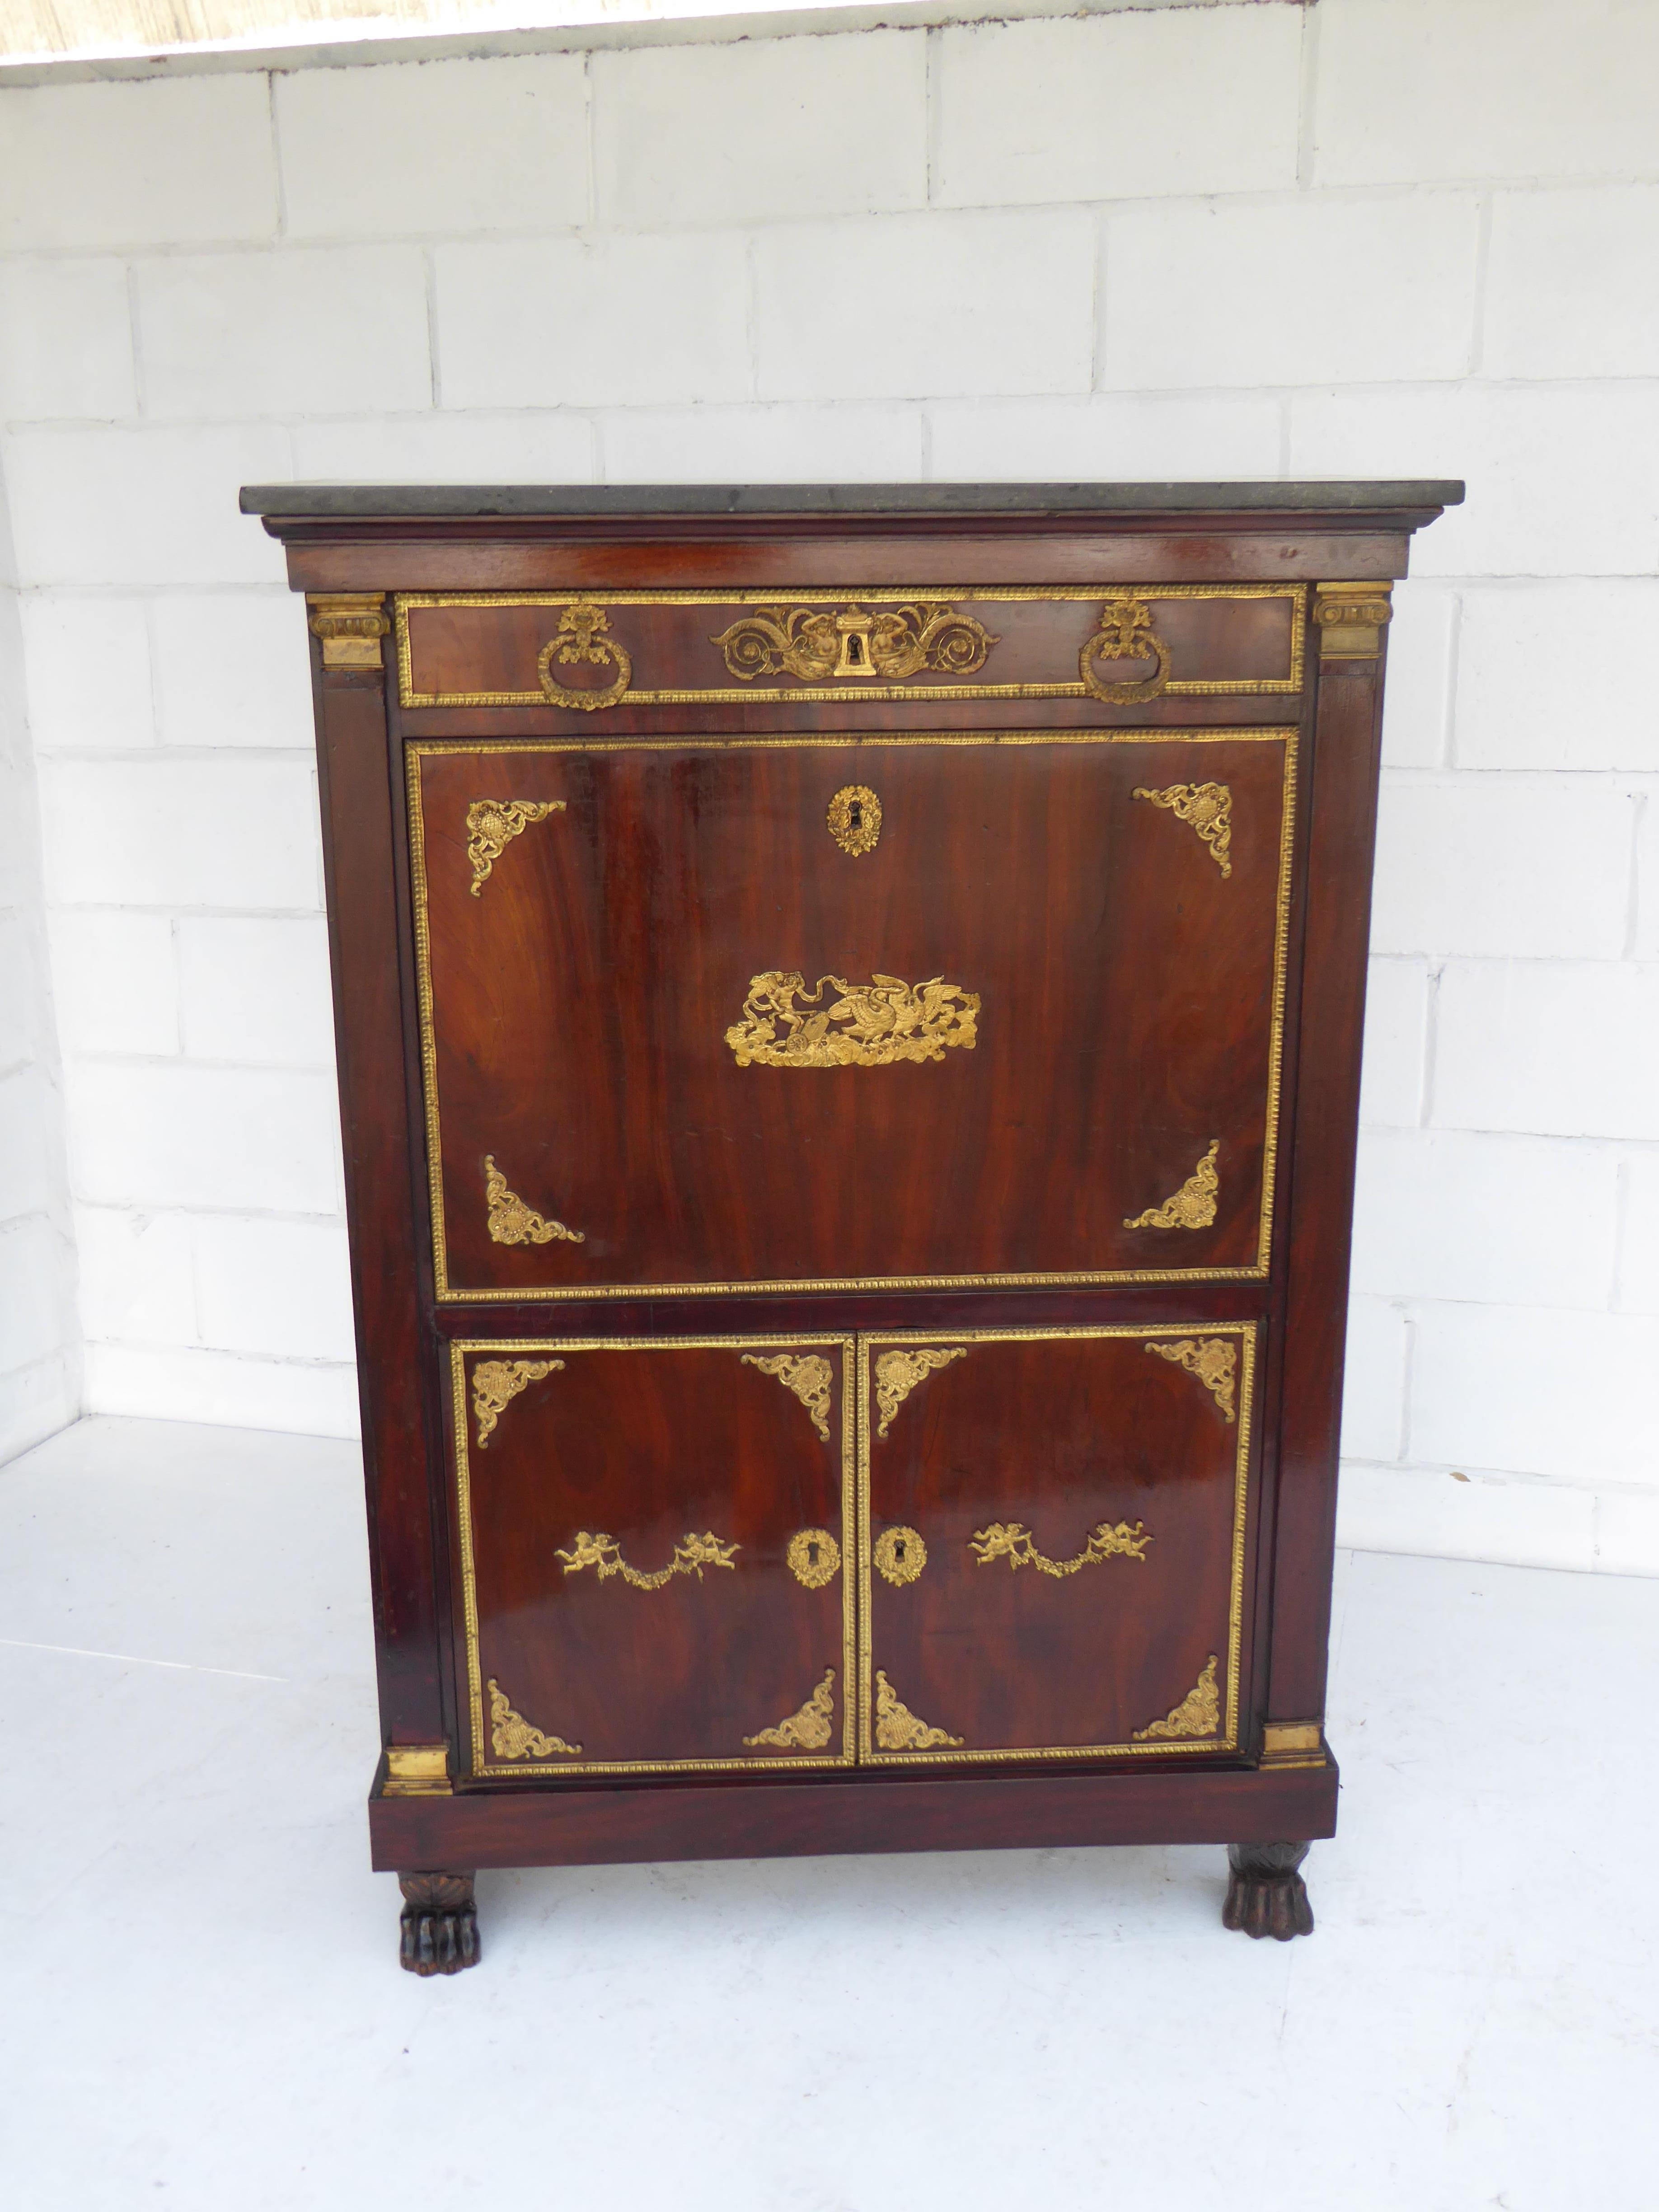 For sale is a fine quality, 18th century Louis XV Escritoire. The Escritoire has a drawer at the top with ornate mounts, above a fall front opening to reveal a fitted interior comprising pigeon holes, drawers and a writing surface. Below this are